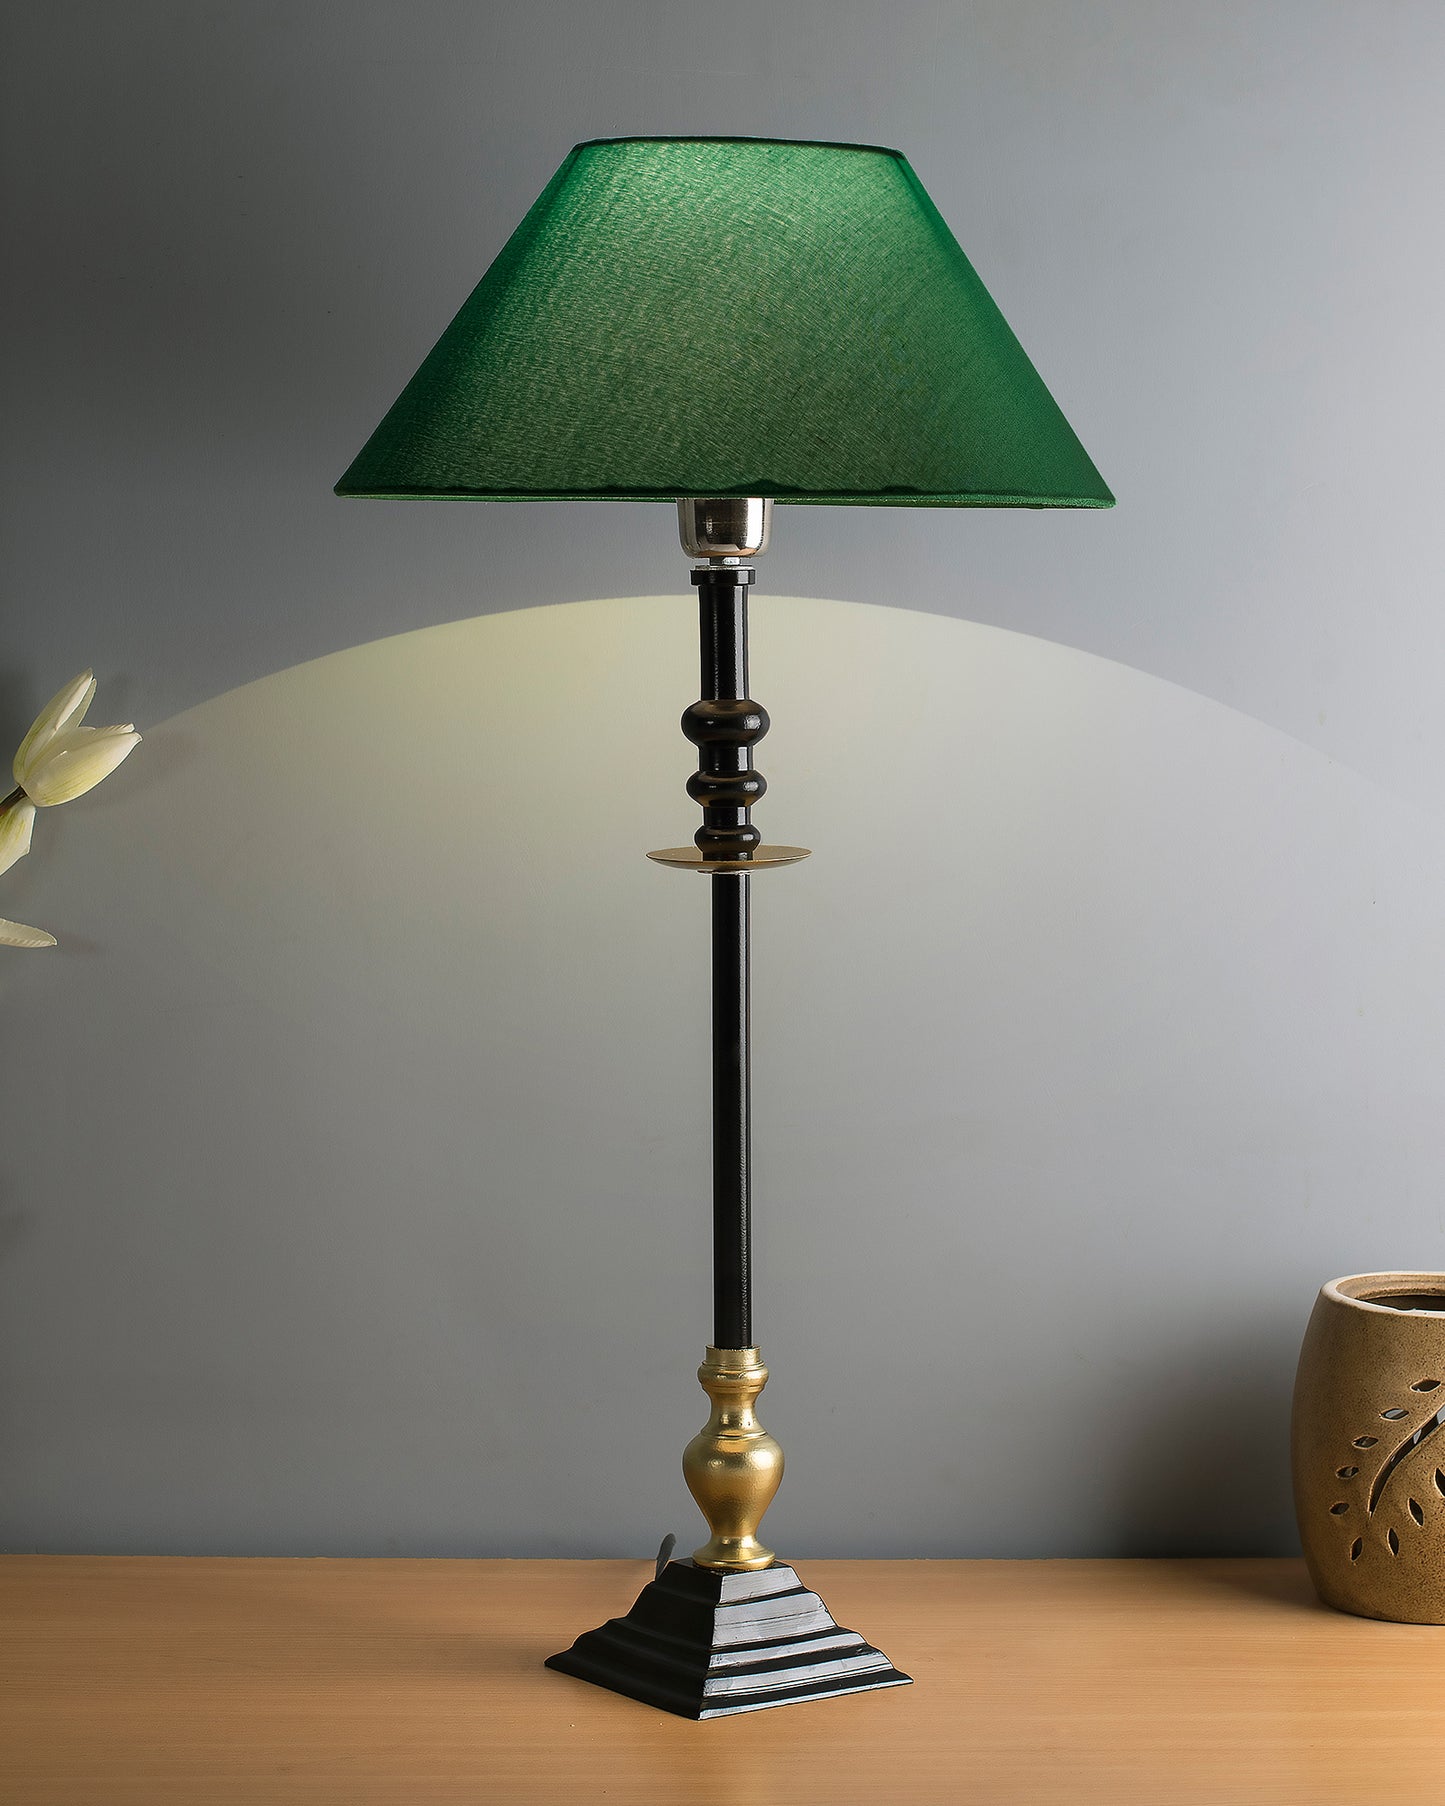 Classic Imperial Black Golden Riveria Table Lamp, Cone Shade